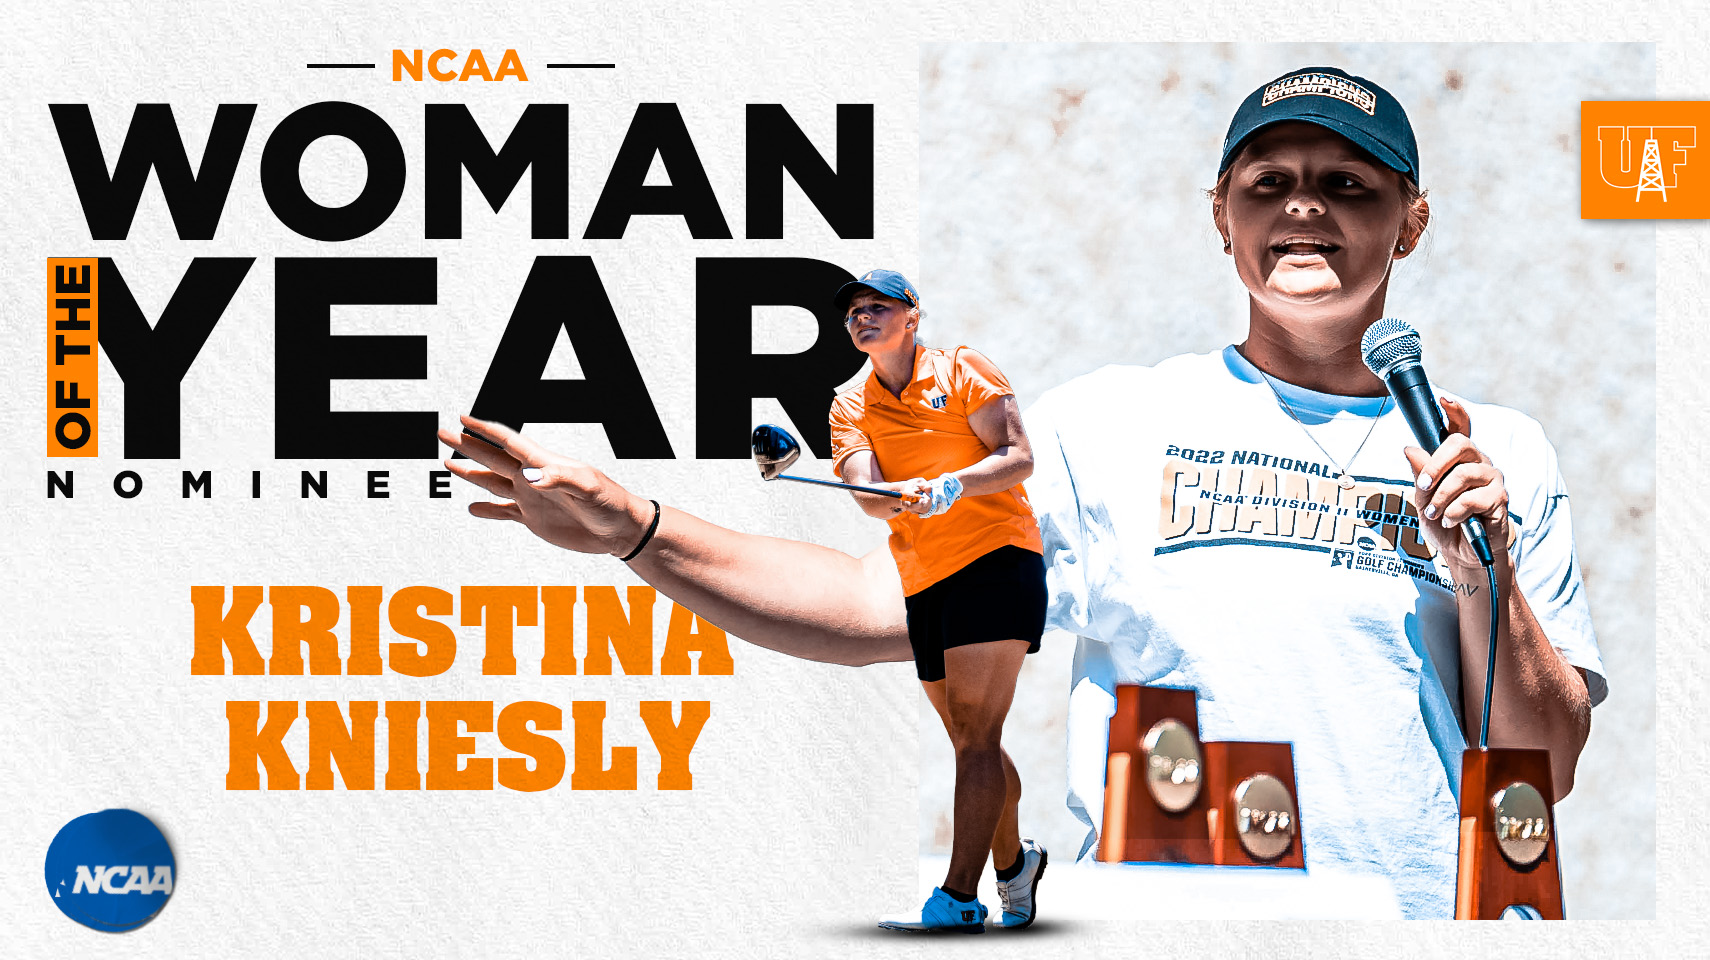 Kniesly Named NCAA Woman of the Year Nominee